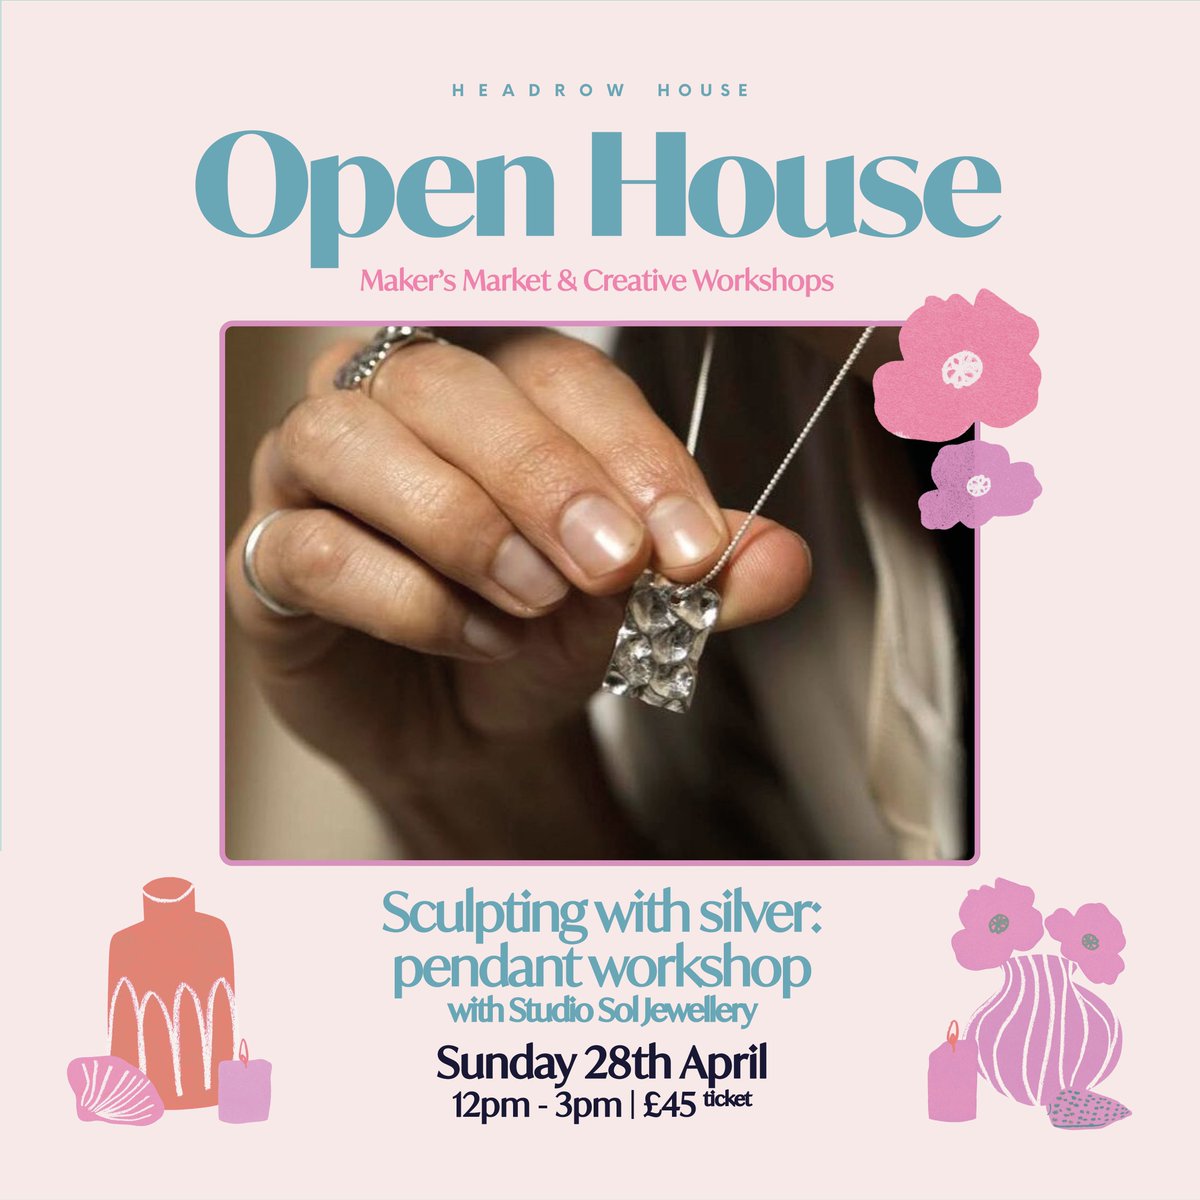 buff.ly/43BAoyL Our Art Market returns to the Beer Hall next month ✨ This time around we have the brilliant Studio Sōl joining us for a pendant workshop, sculpting with silver. Grab your tickets for the workshop via @dicefm. Linked above.